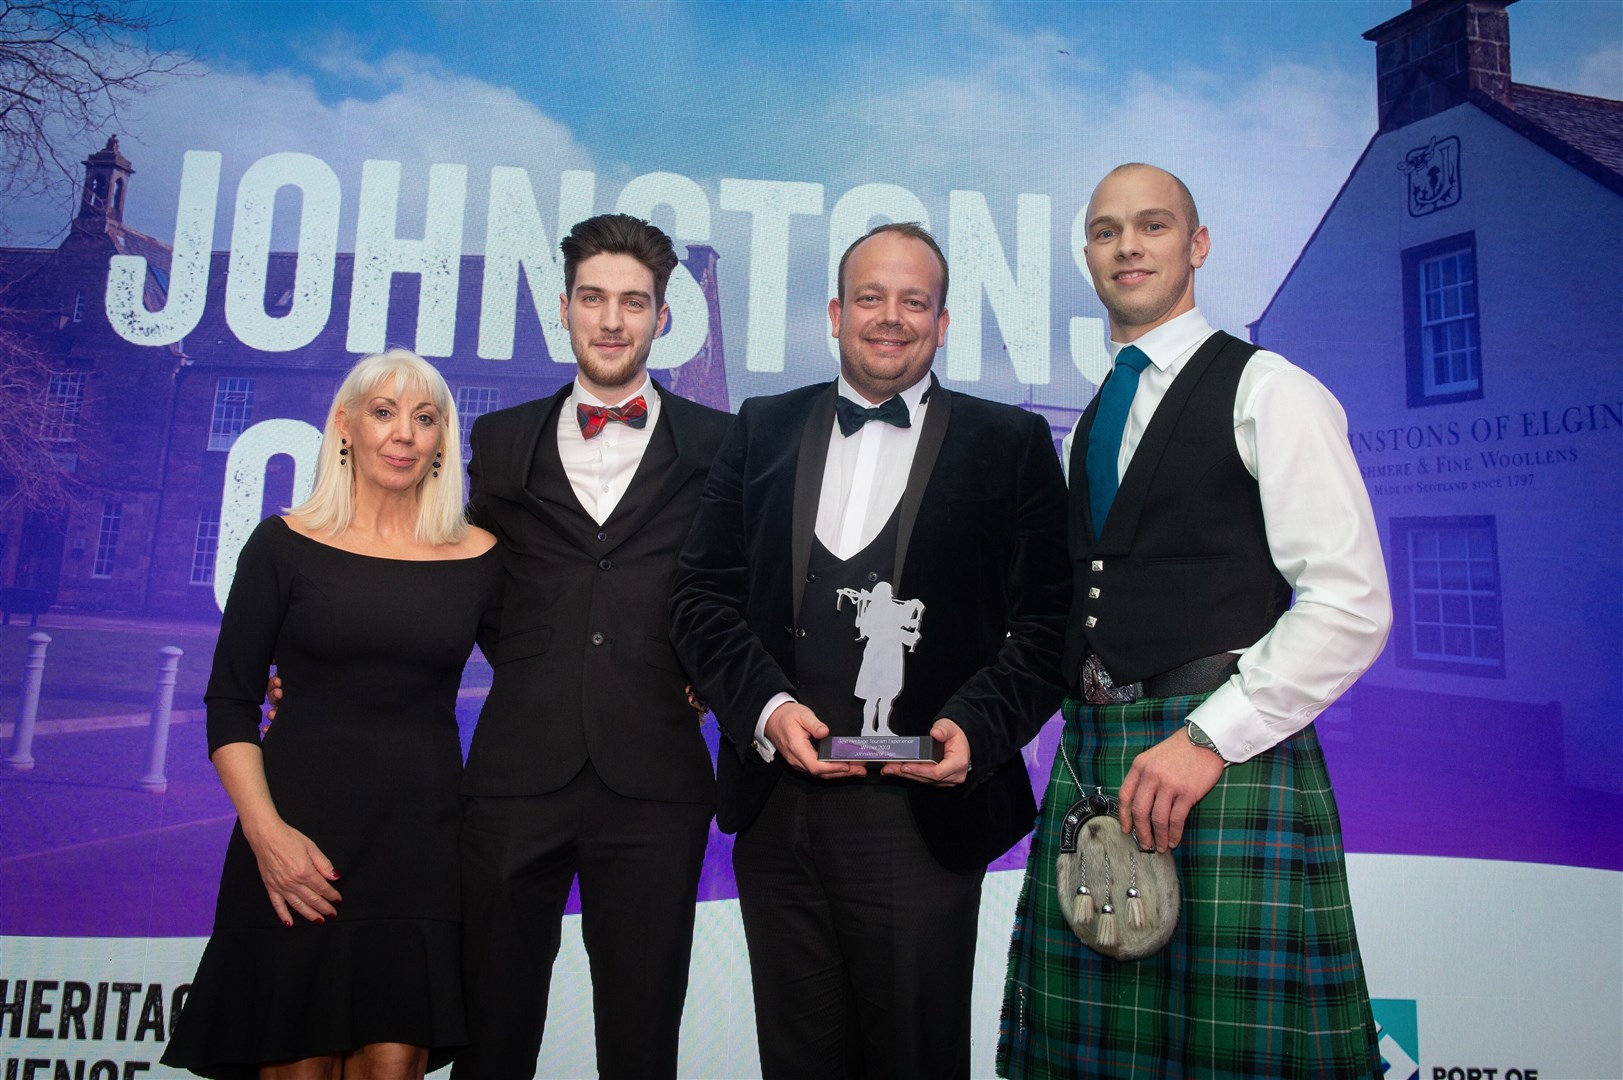 On stage at the Highlands and Islands Tourism Awards are (from left) Geraldine Brebner, Lewis Kinniburgh and Stewart Marshall of Johnstons of Elgin with Stuart MacDonald-Butler of the Port of Cromarty Firth Authority.